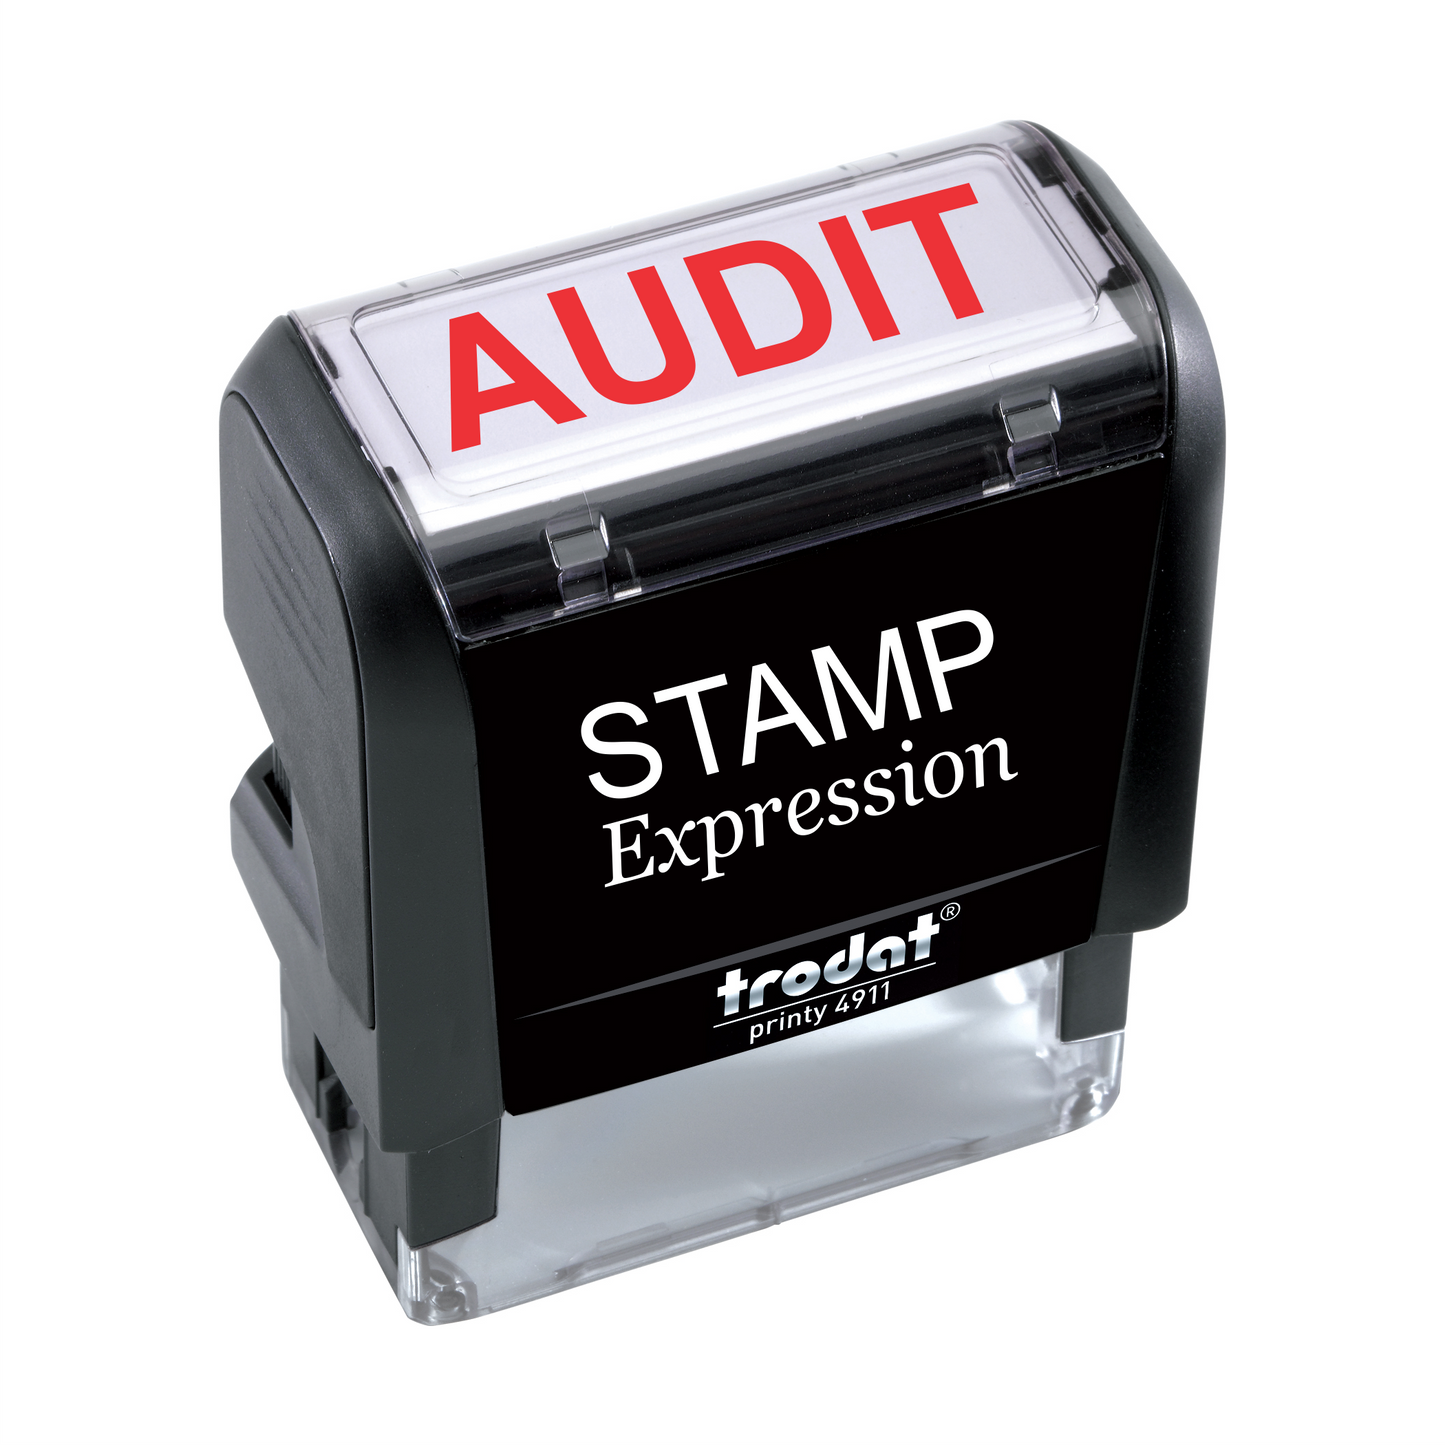 Audit Office Self Inking Rubber Stamp (SH-5809)